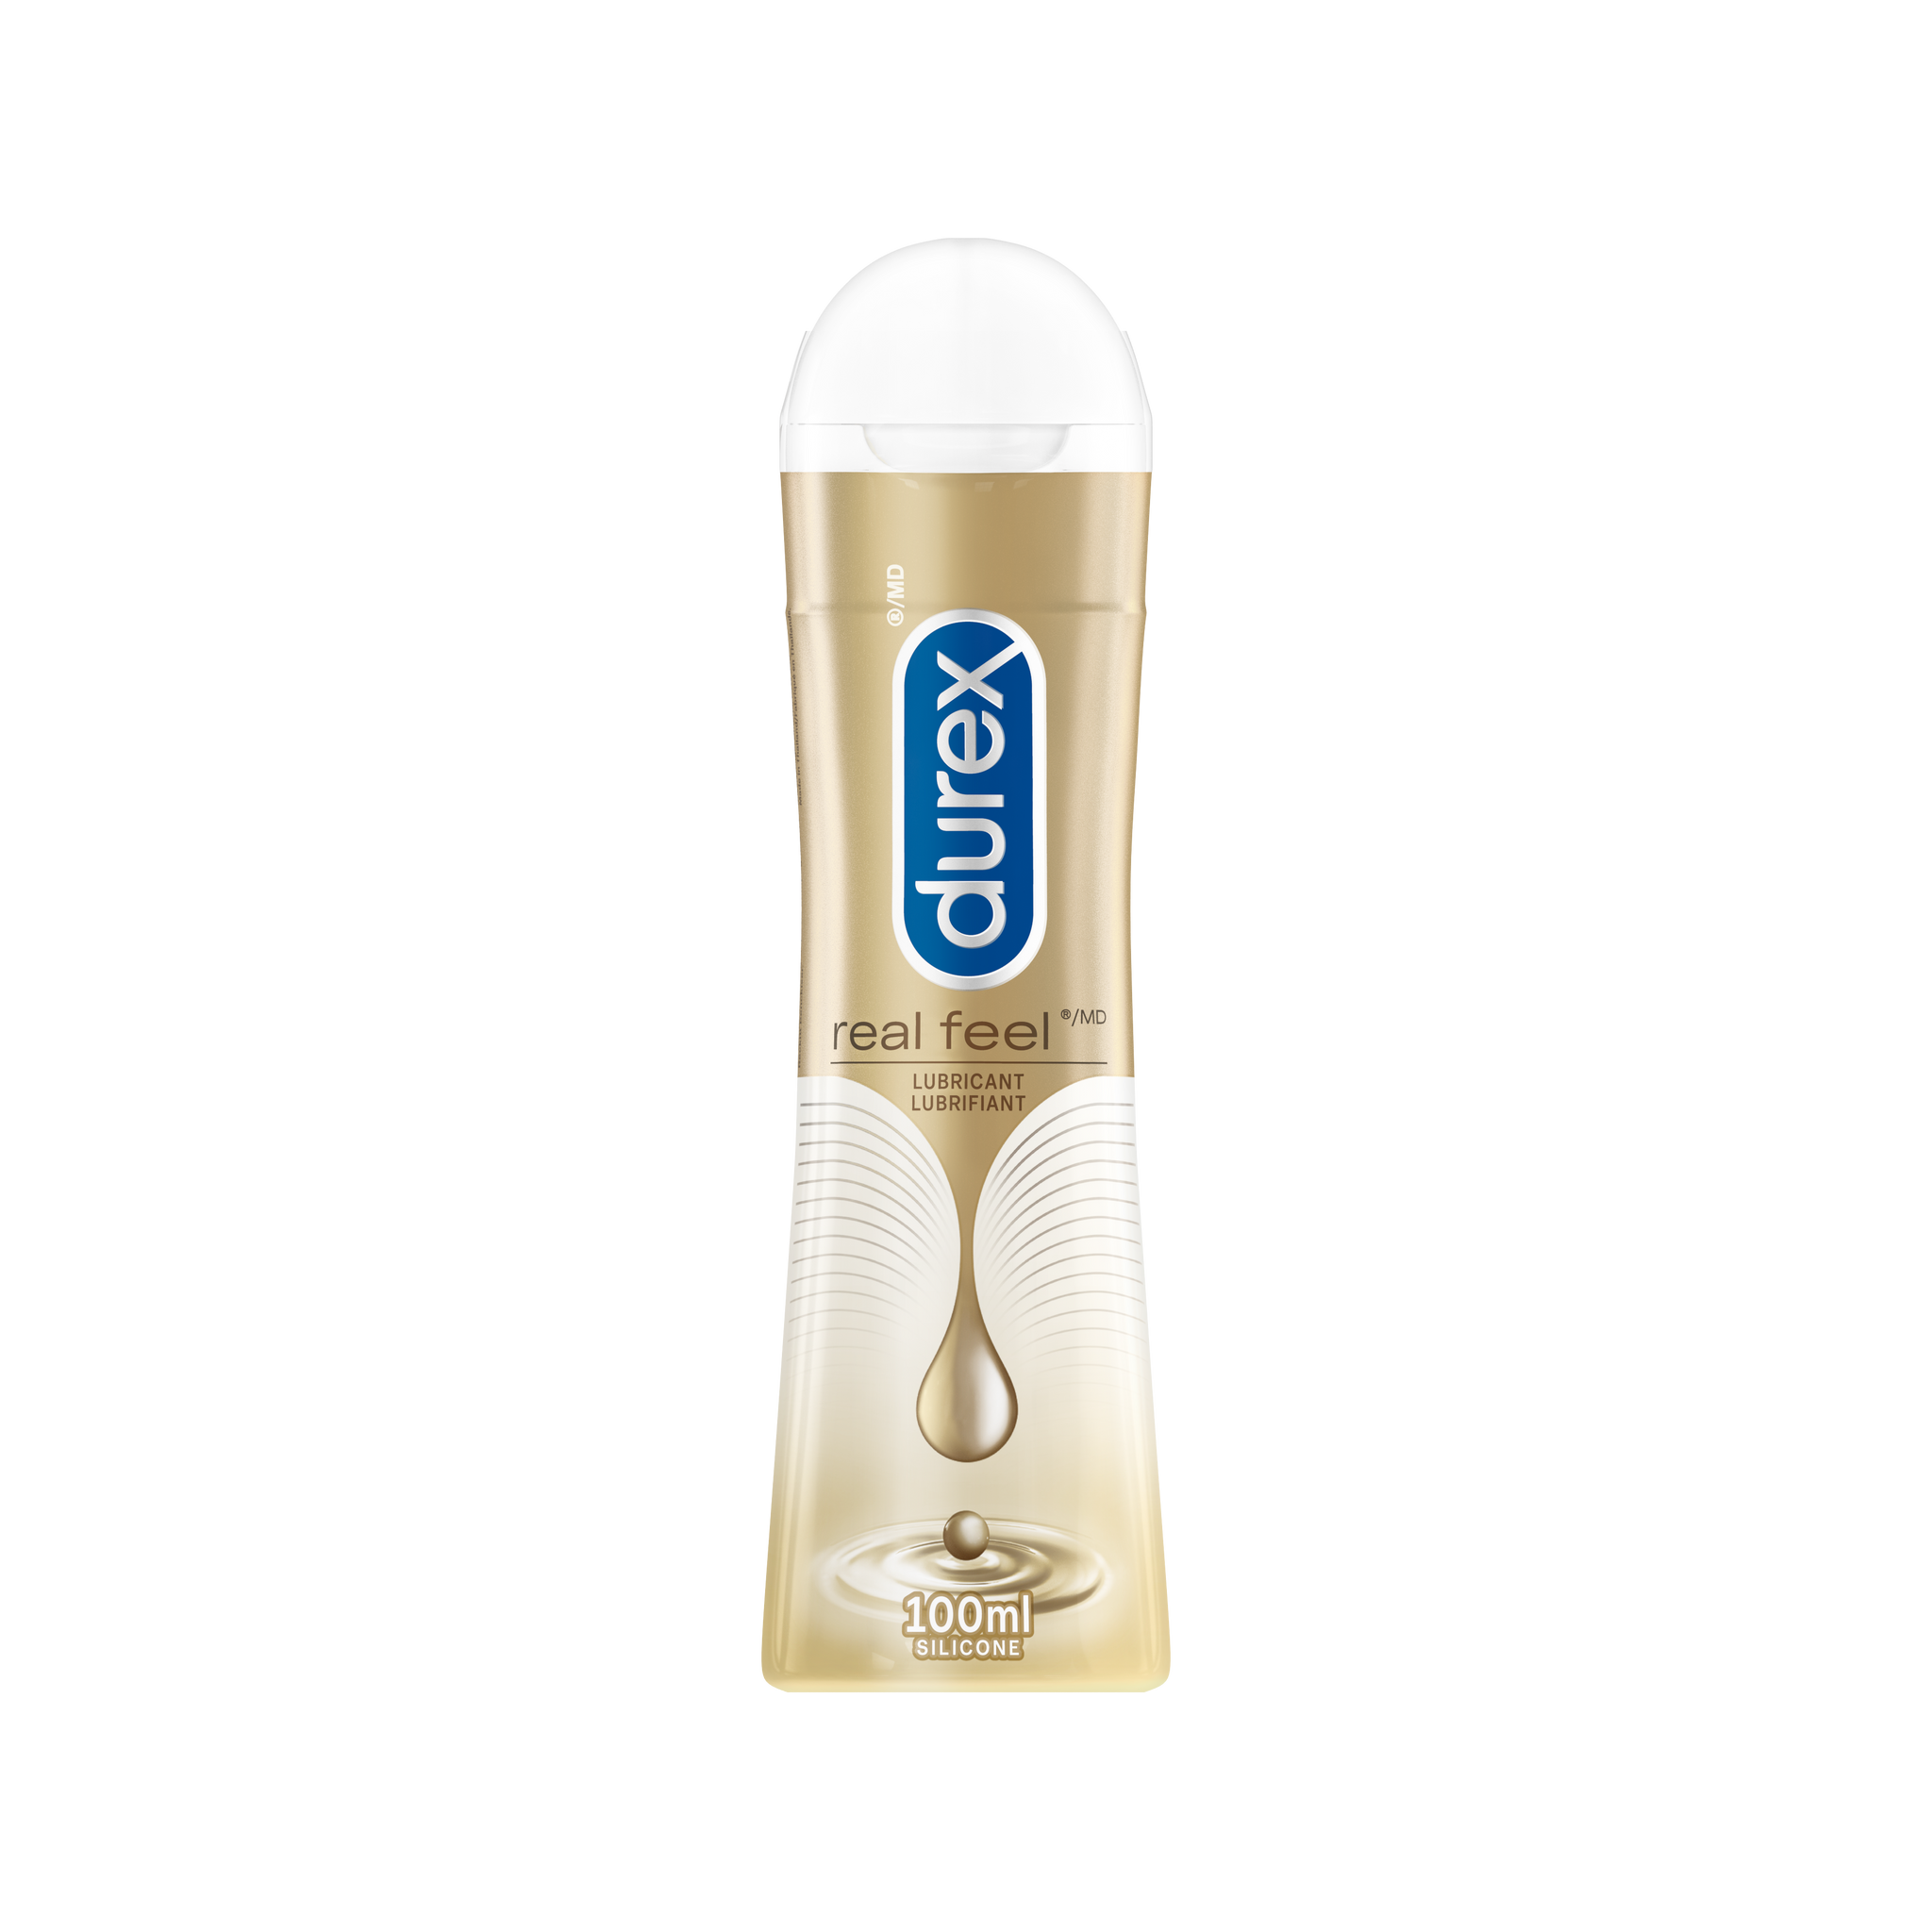 packshot of Bottle of Durex Real Feel lube stands tall.